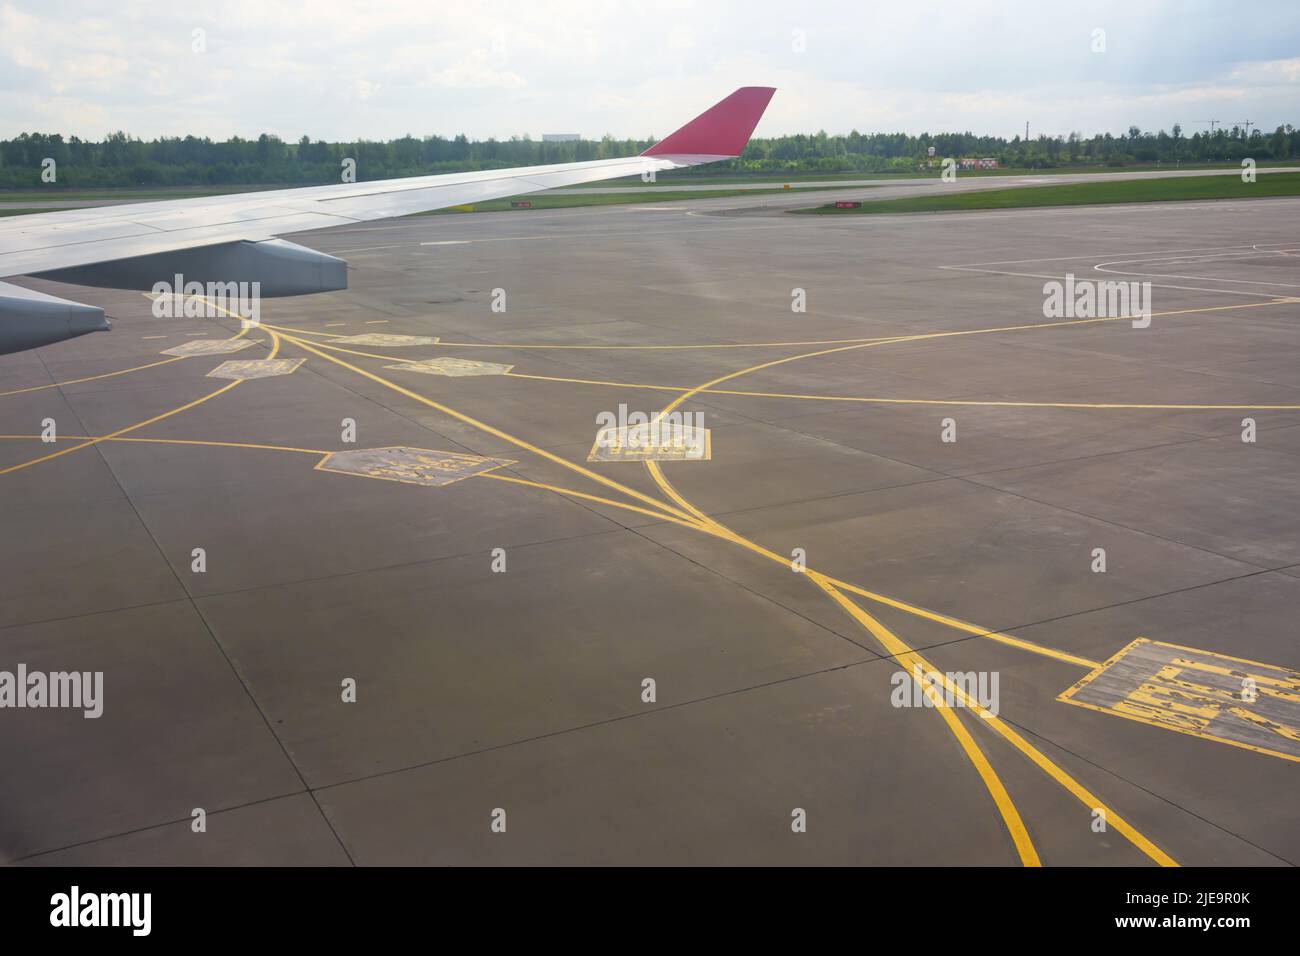 Airport yellow taxiway lines markings on the apron on concrete asphalt, sign for airplane pilots Stock Photo